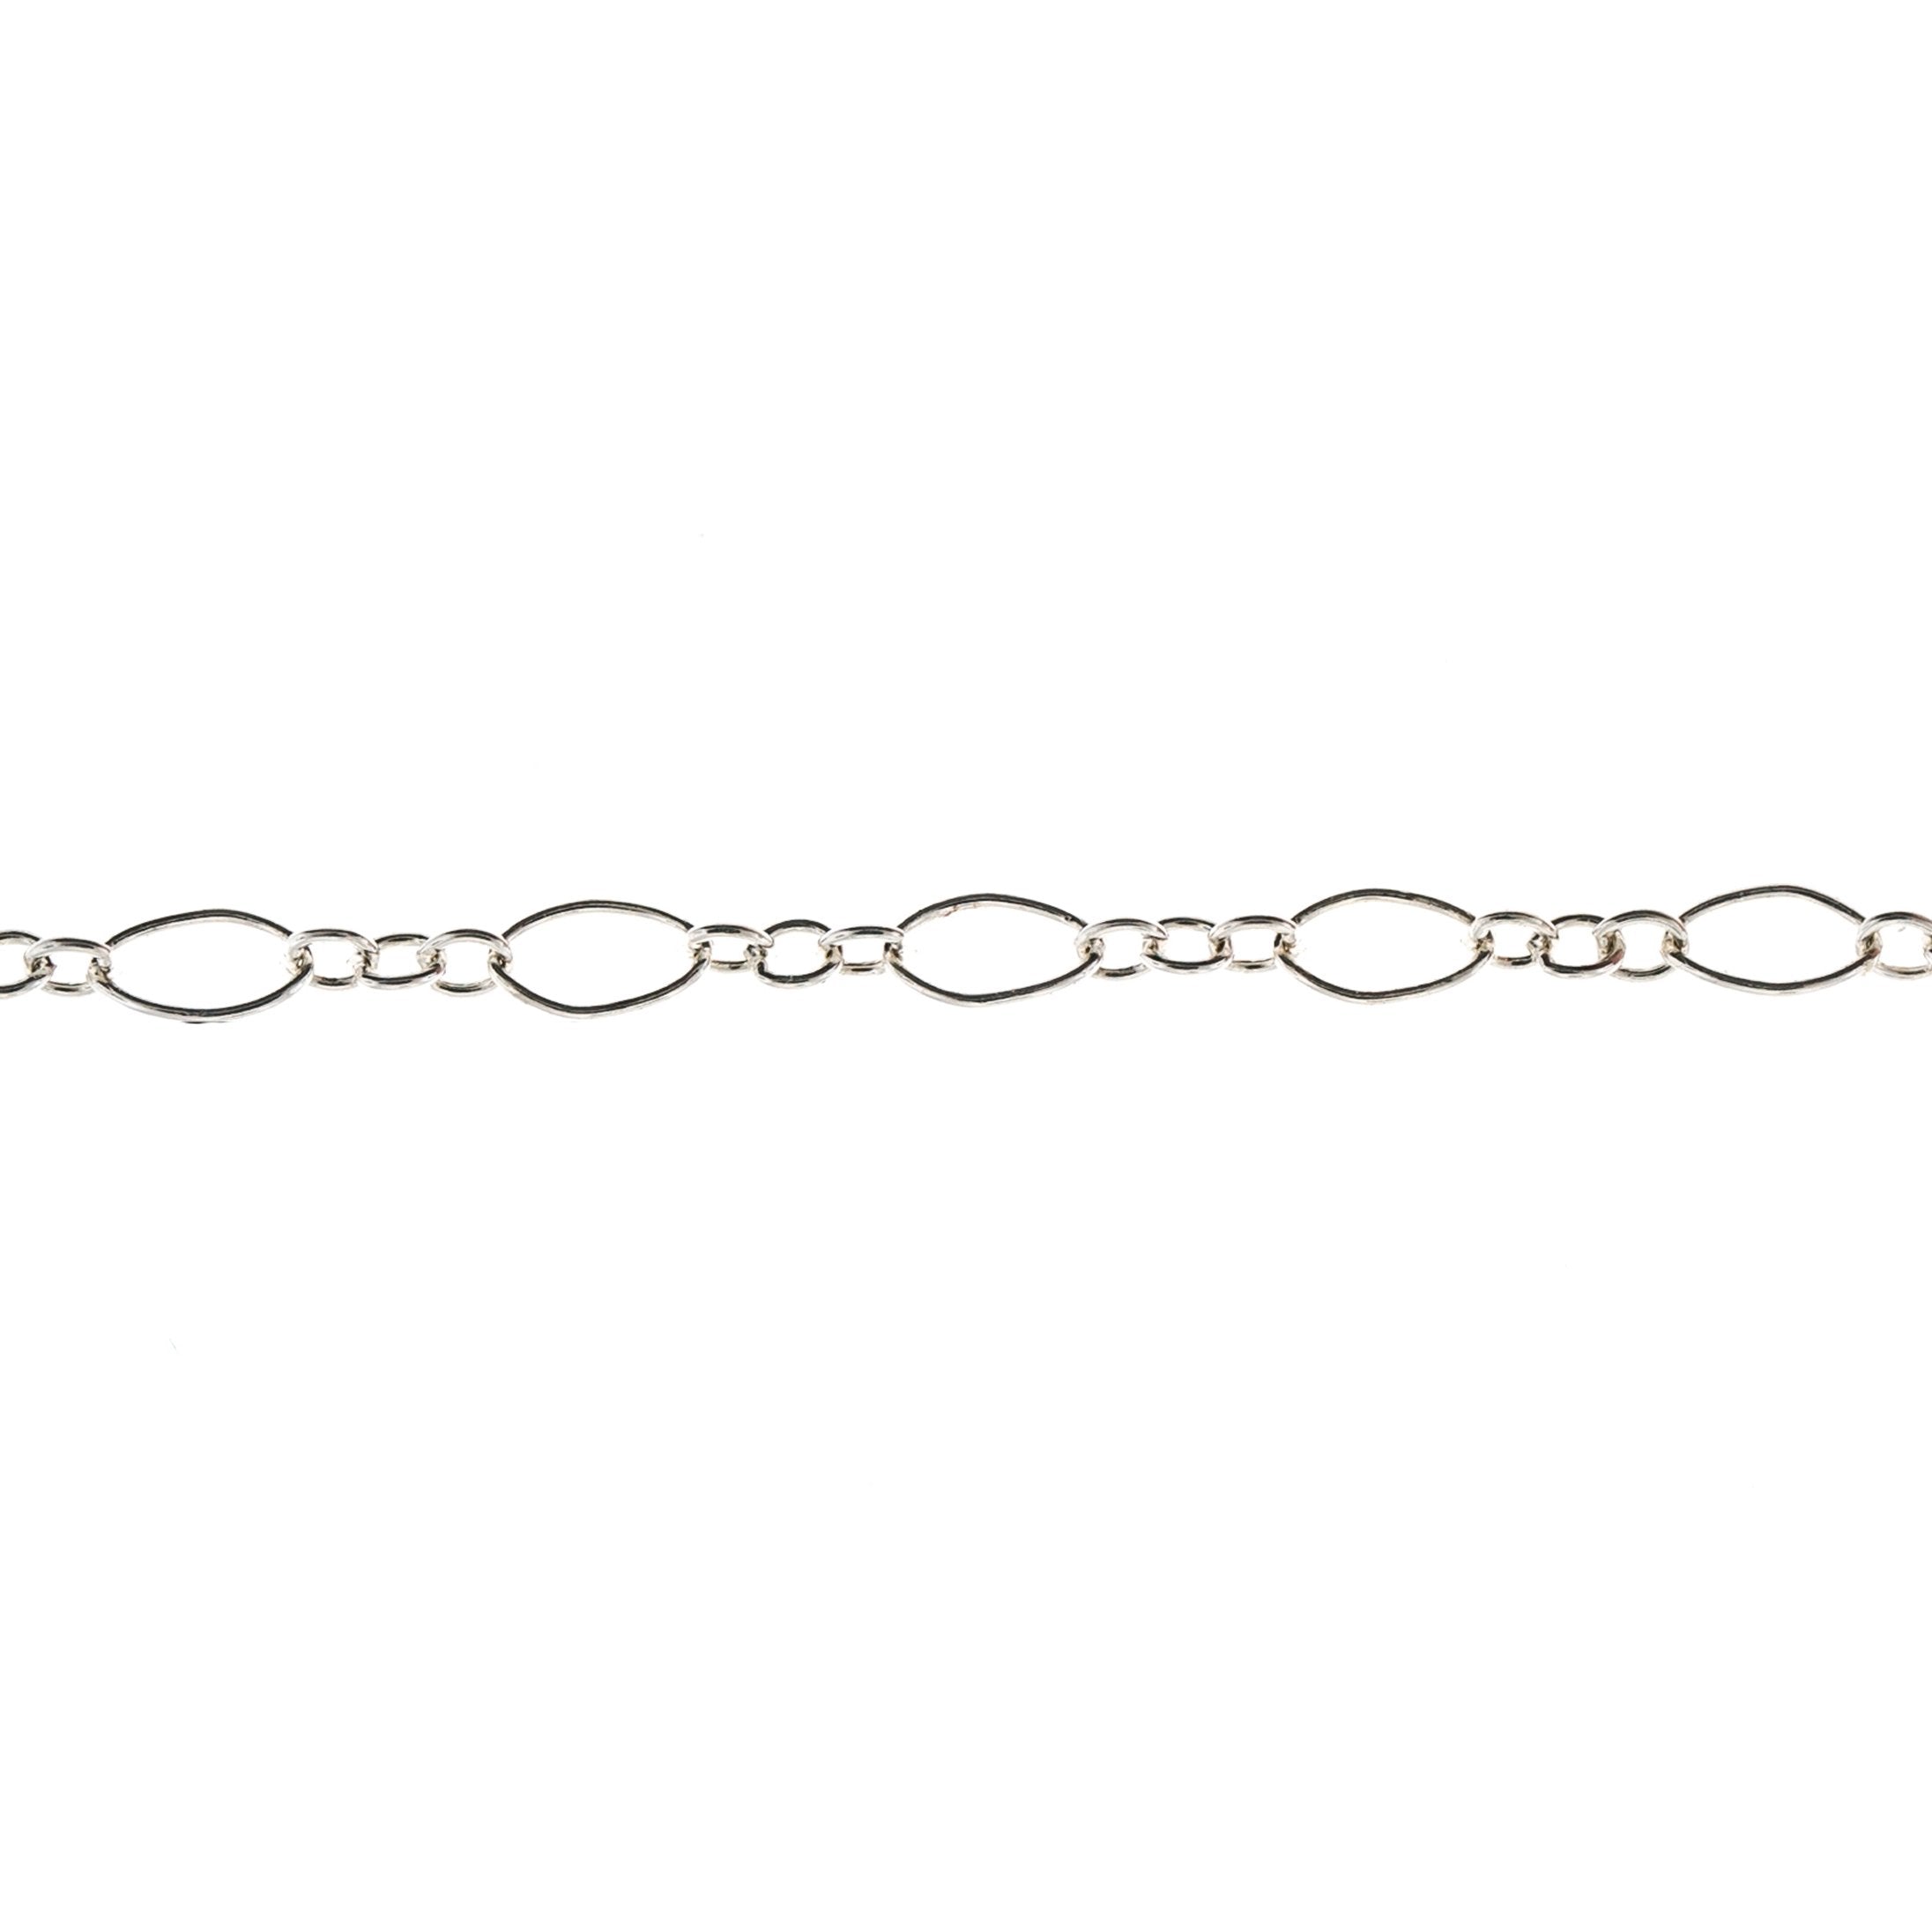 Sterling Silver 2.3MM 3&1 Cable Chain